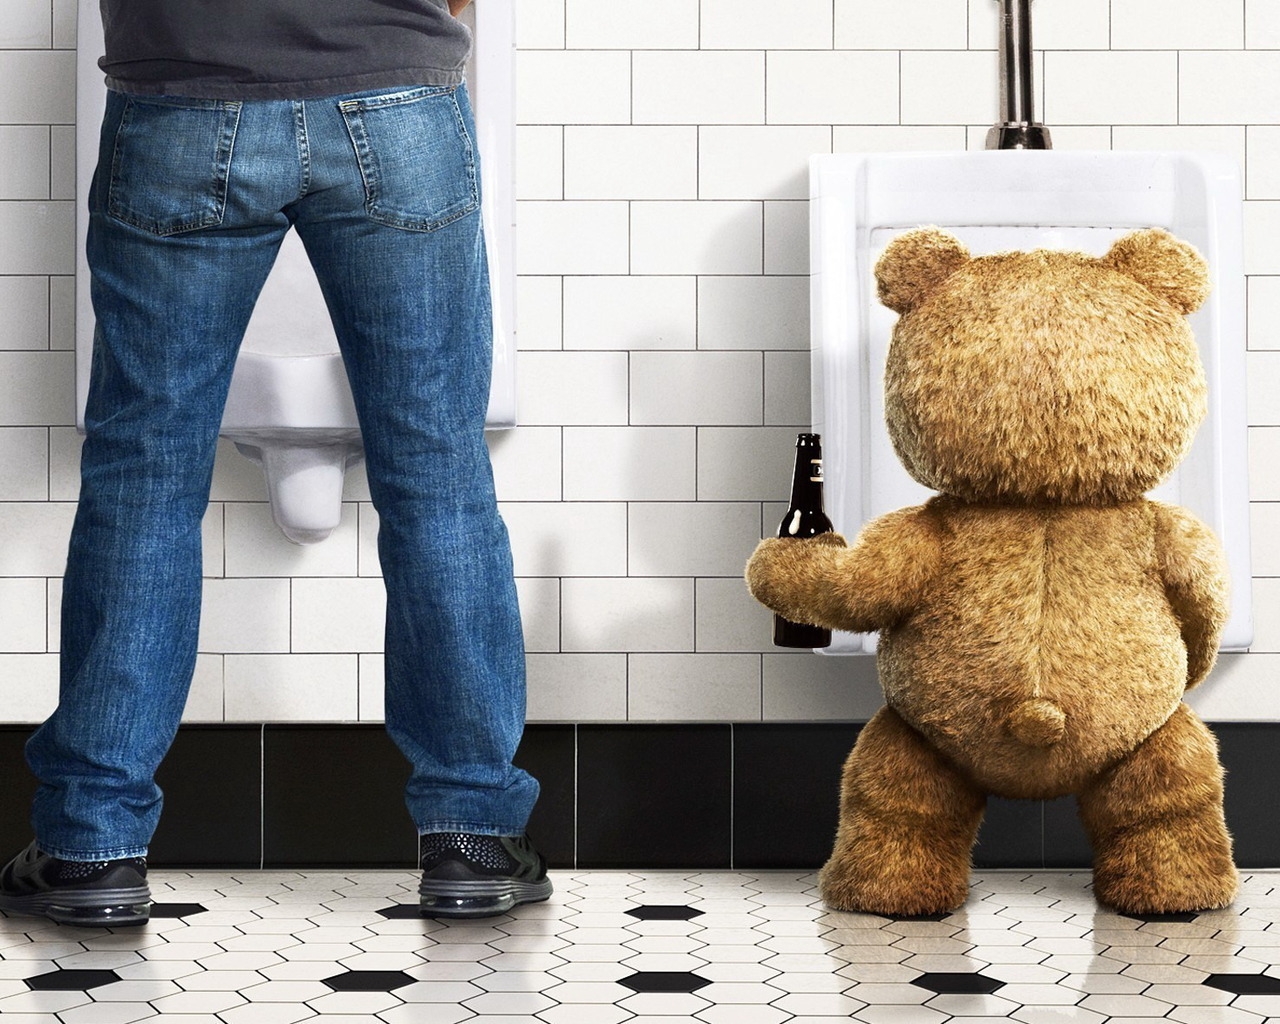 Ted Movie for 1280 x 1024 resolution